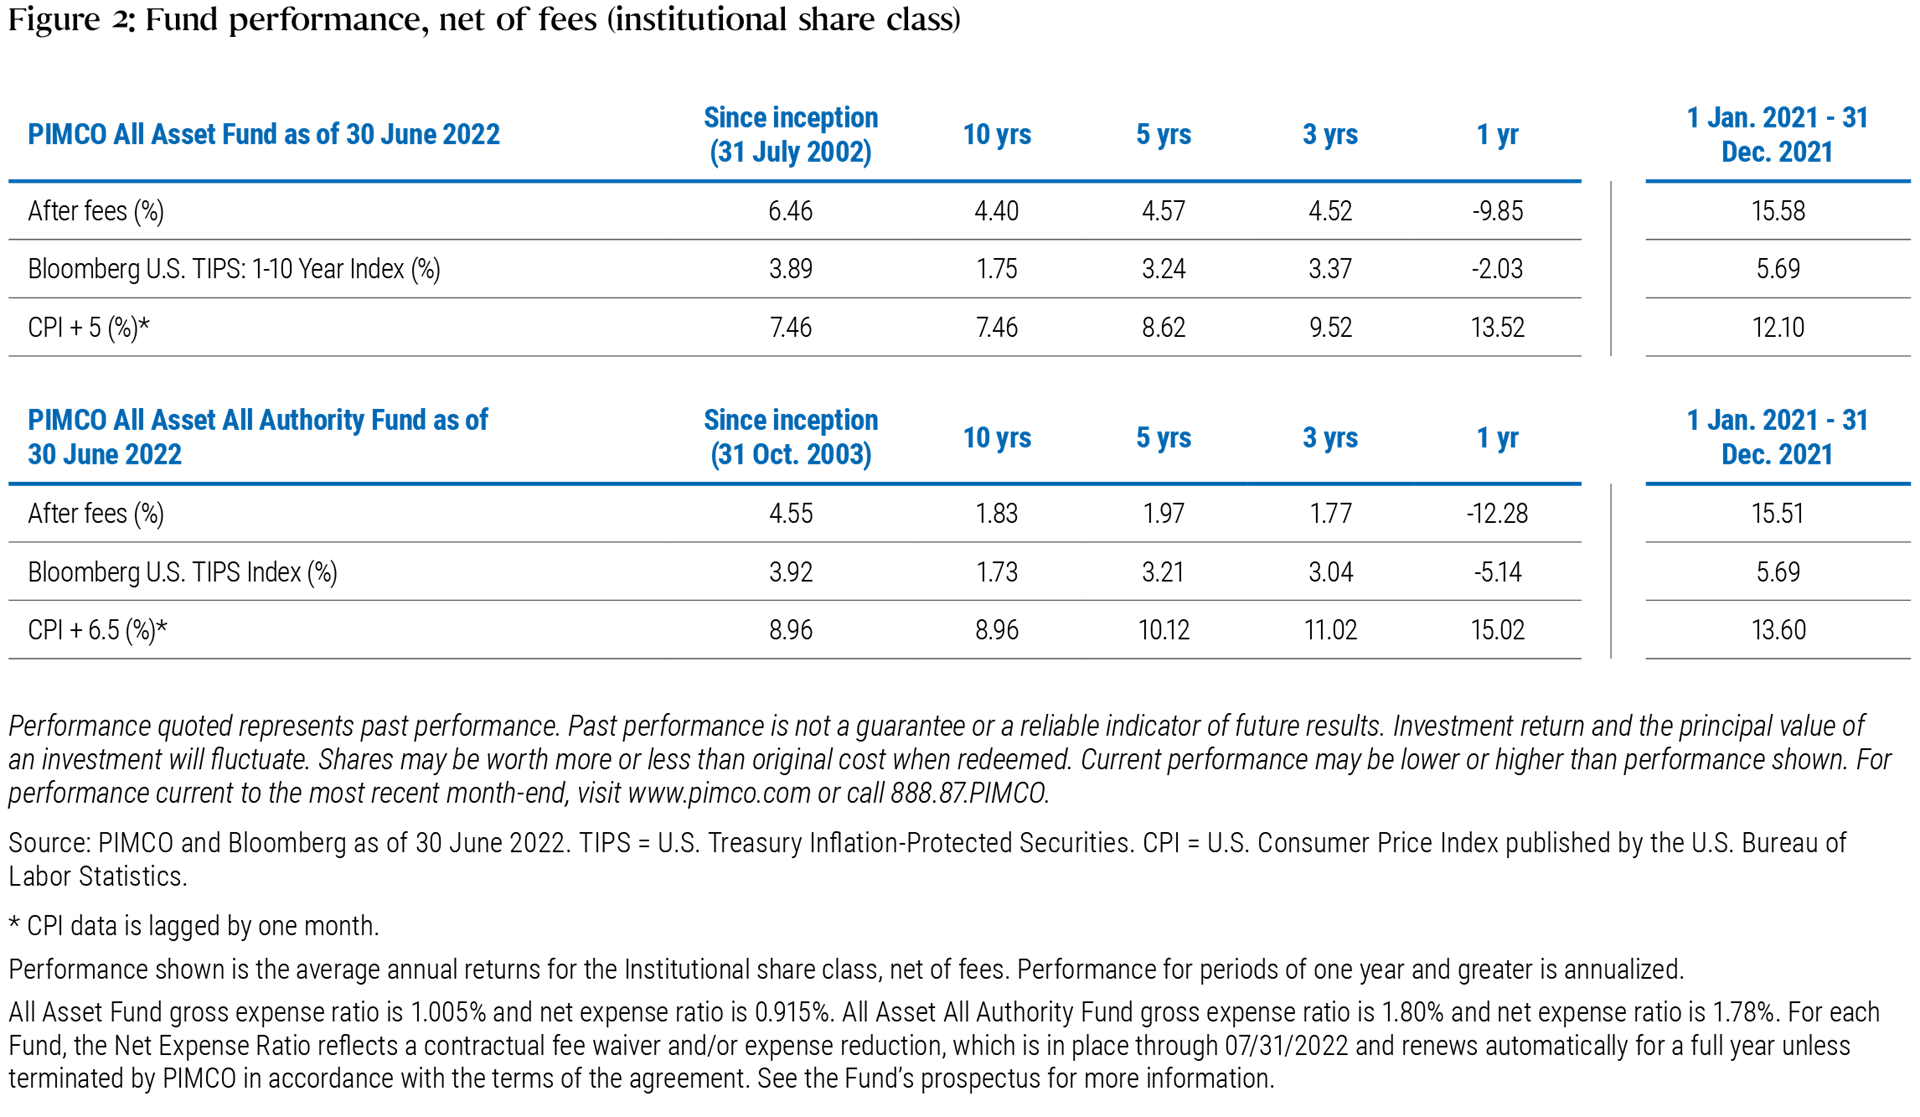 Figure 2 is a table listing net-of-fees performance for Institutional shares of the PIMCO All Asset Fund and PIMCO All Asset All Authority Fund as of 30 June 2022 over one-, three-, five-, and ten-year and since inception time frames, along with one-year performance as of 31 December 2021. Benchmark performance is also included. Data is listed within the table, with explanatory notes below.